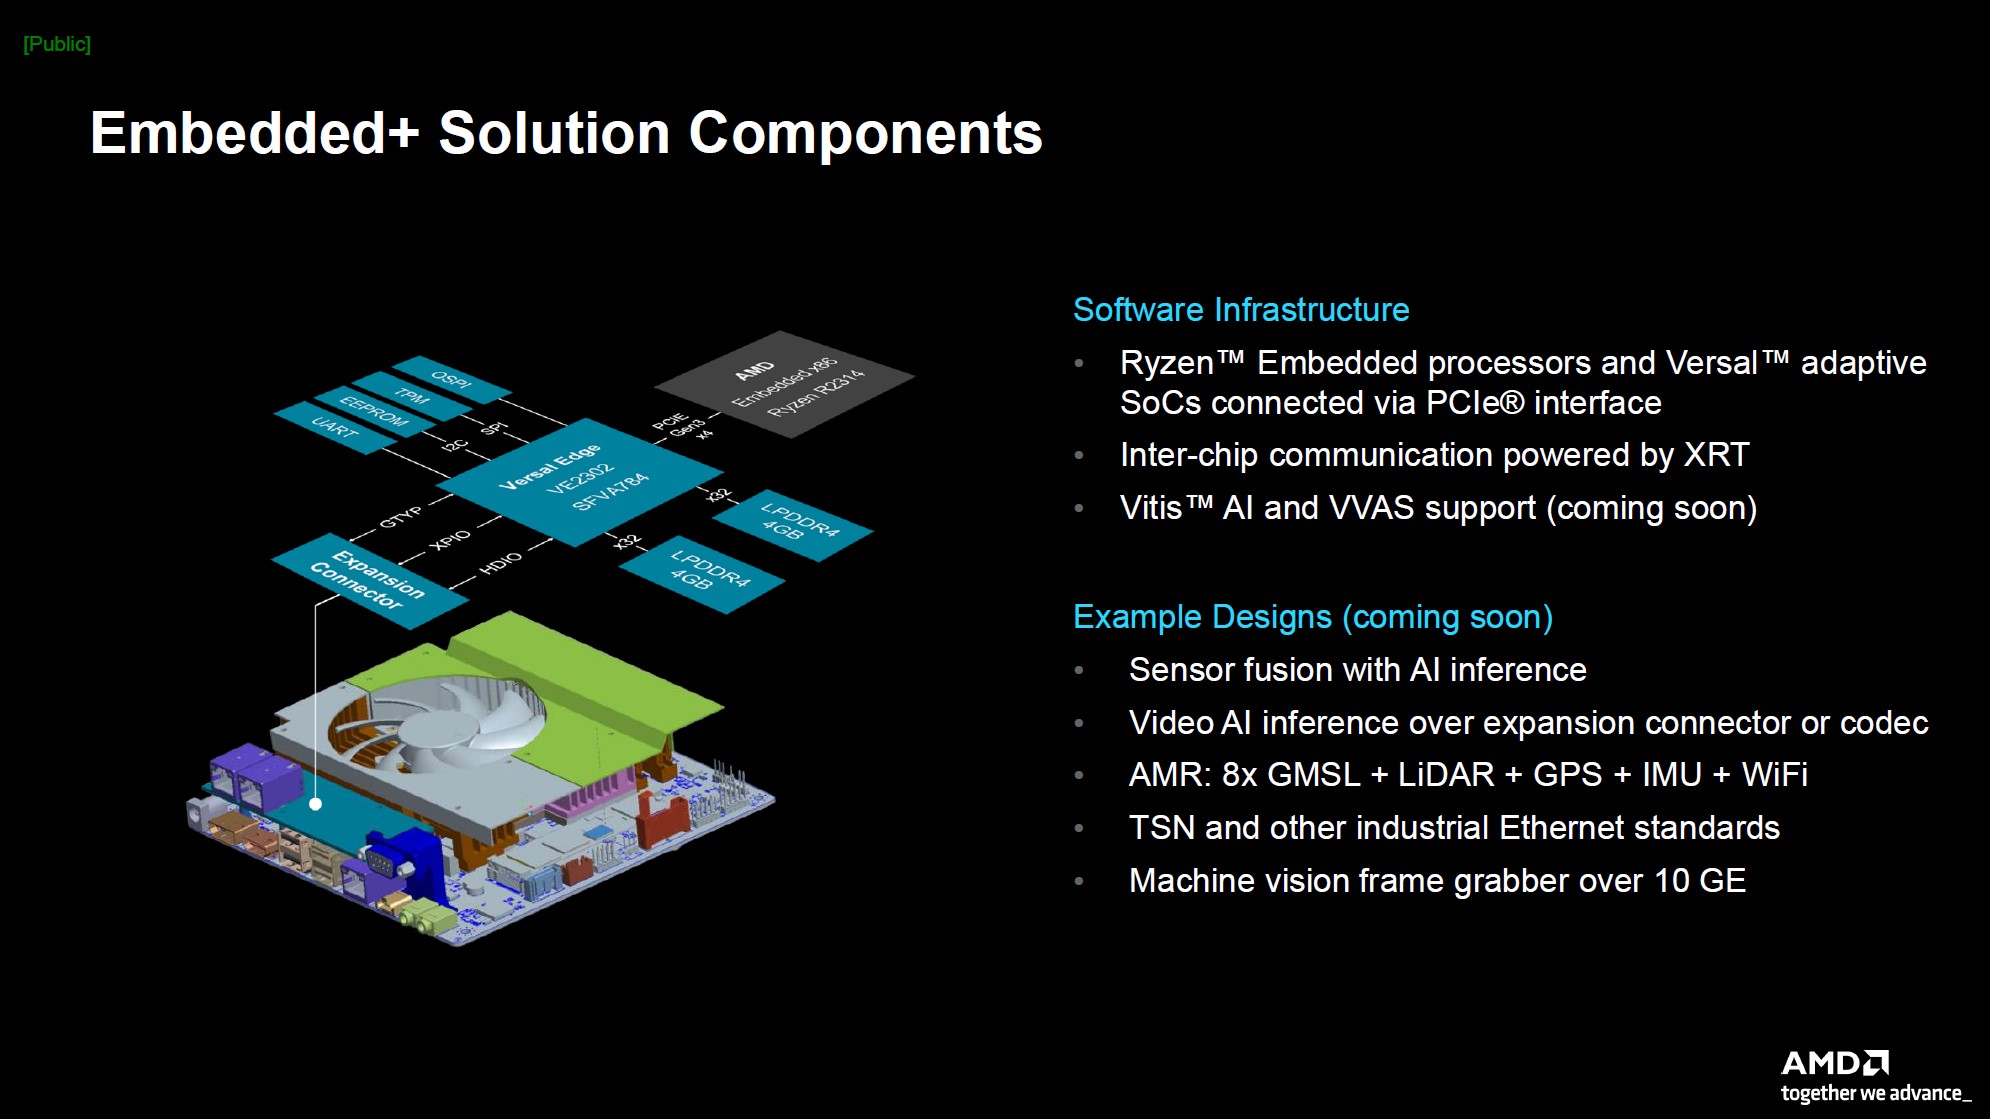 AMD-Embedded-Plus-Solution-Compontents.jpg